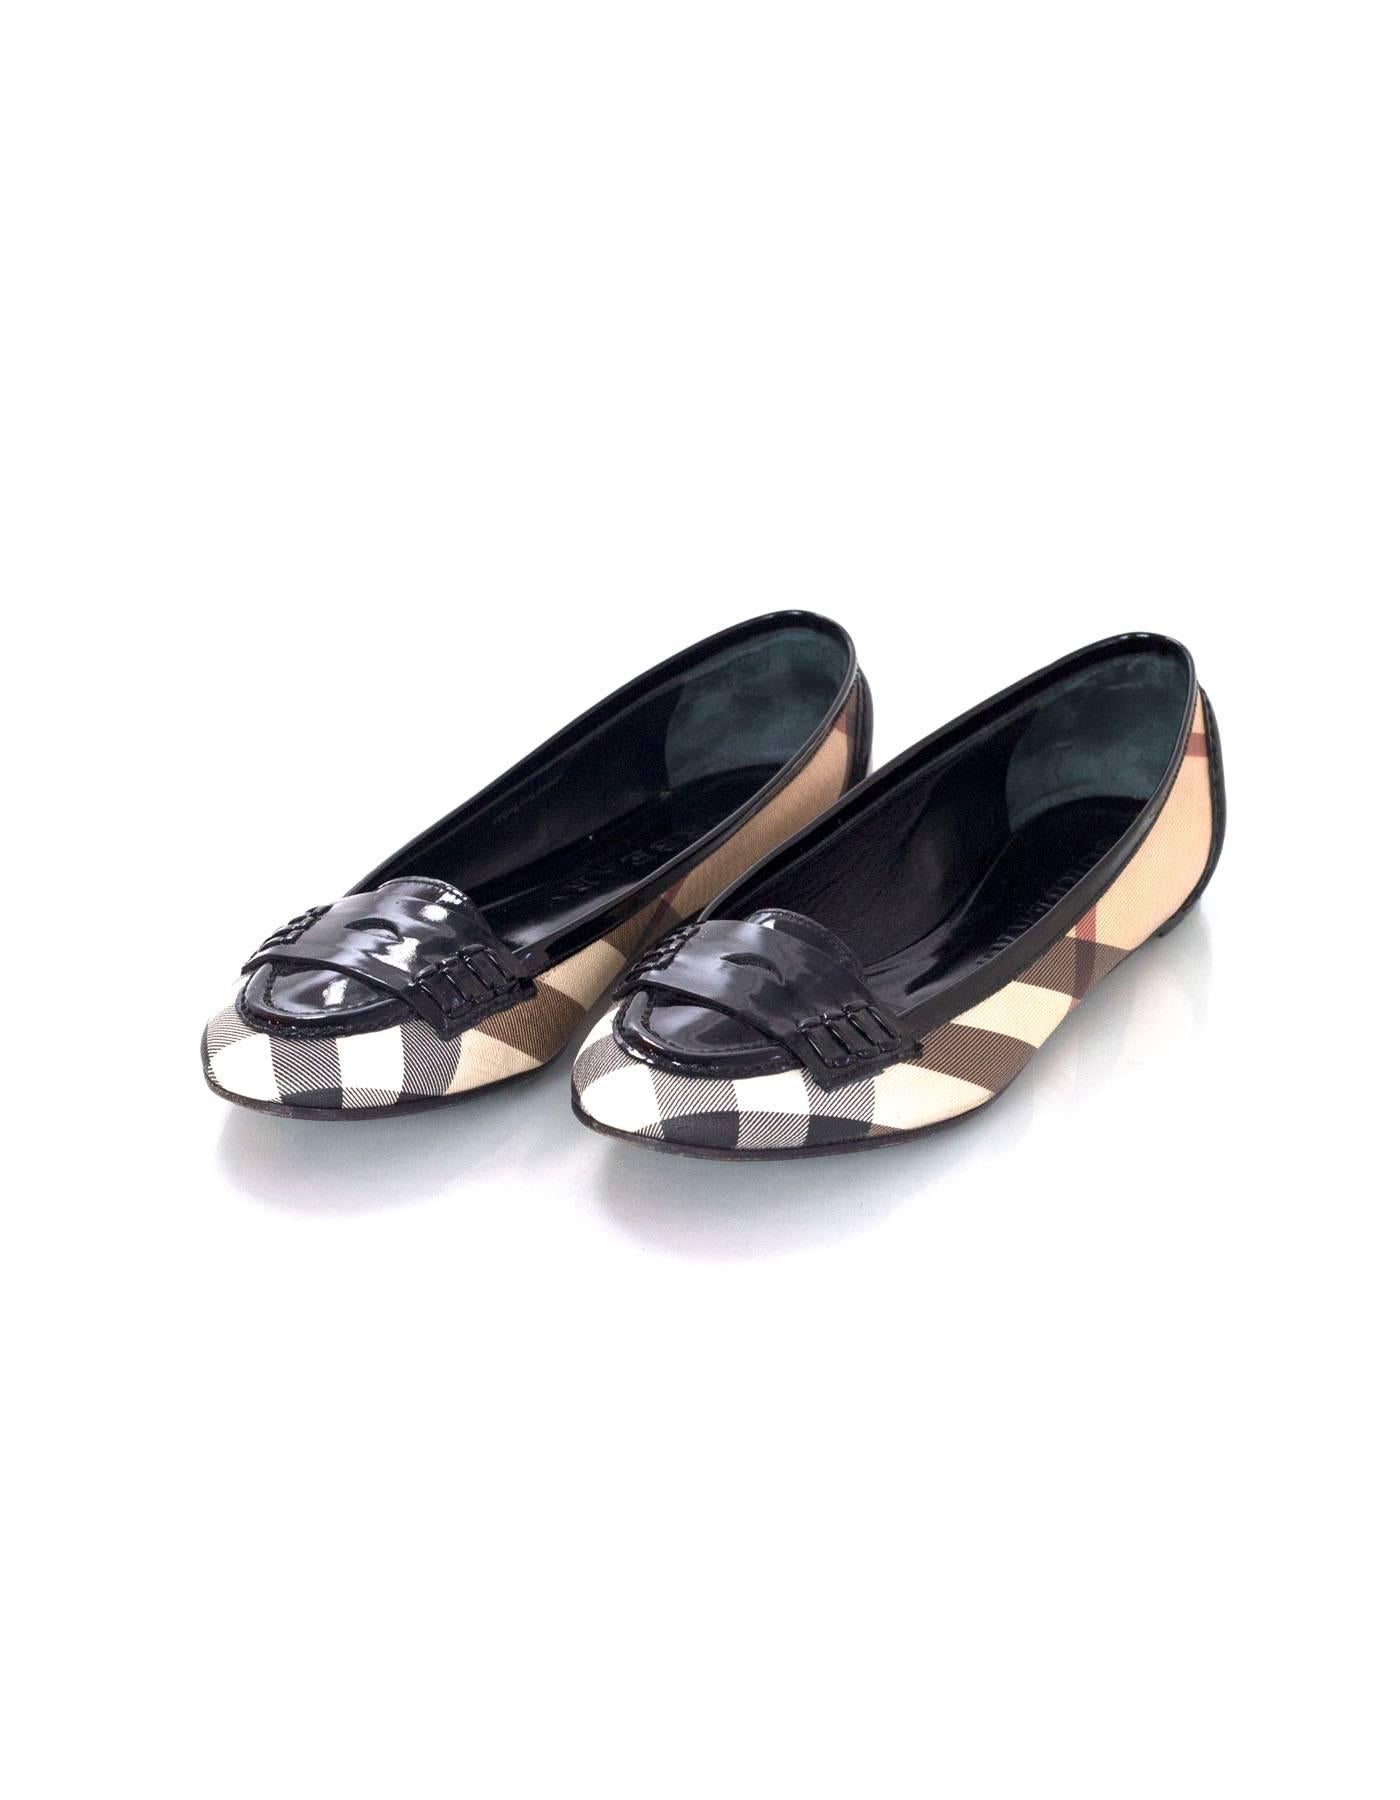 100% Authentic Burberry Check Ballet Loafer Sz 37.  Features penny loafer styling in black patent leather and detailing at the heel. Excellent pre-owned condition with the exception of scuffs on the soles.

Made In: Italy
Color: Camel plaid,